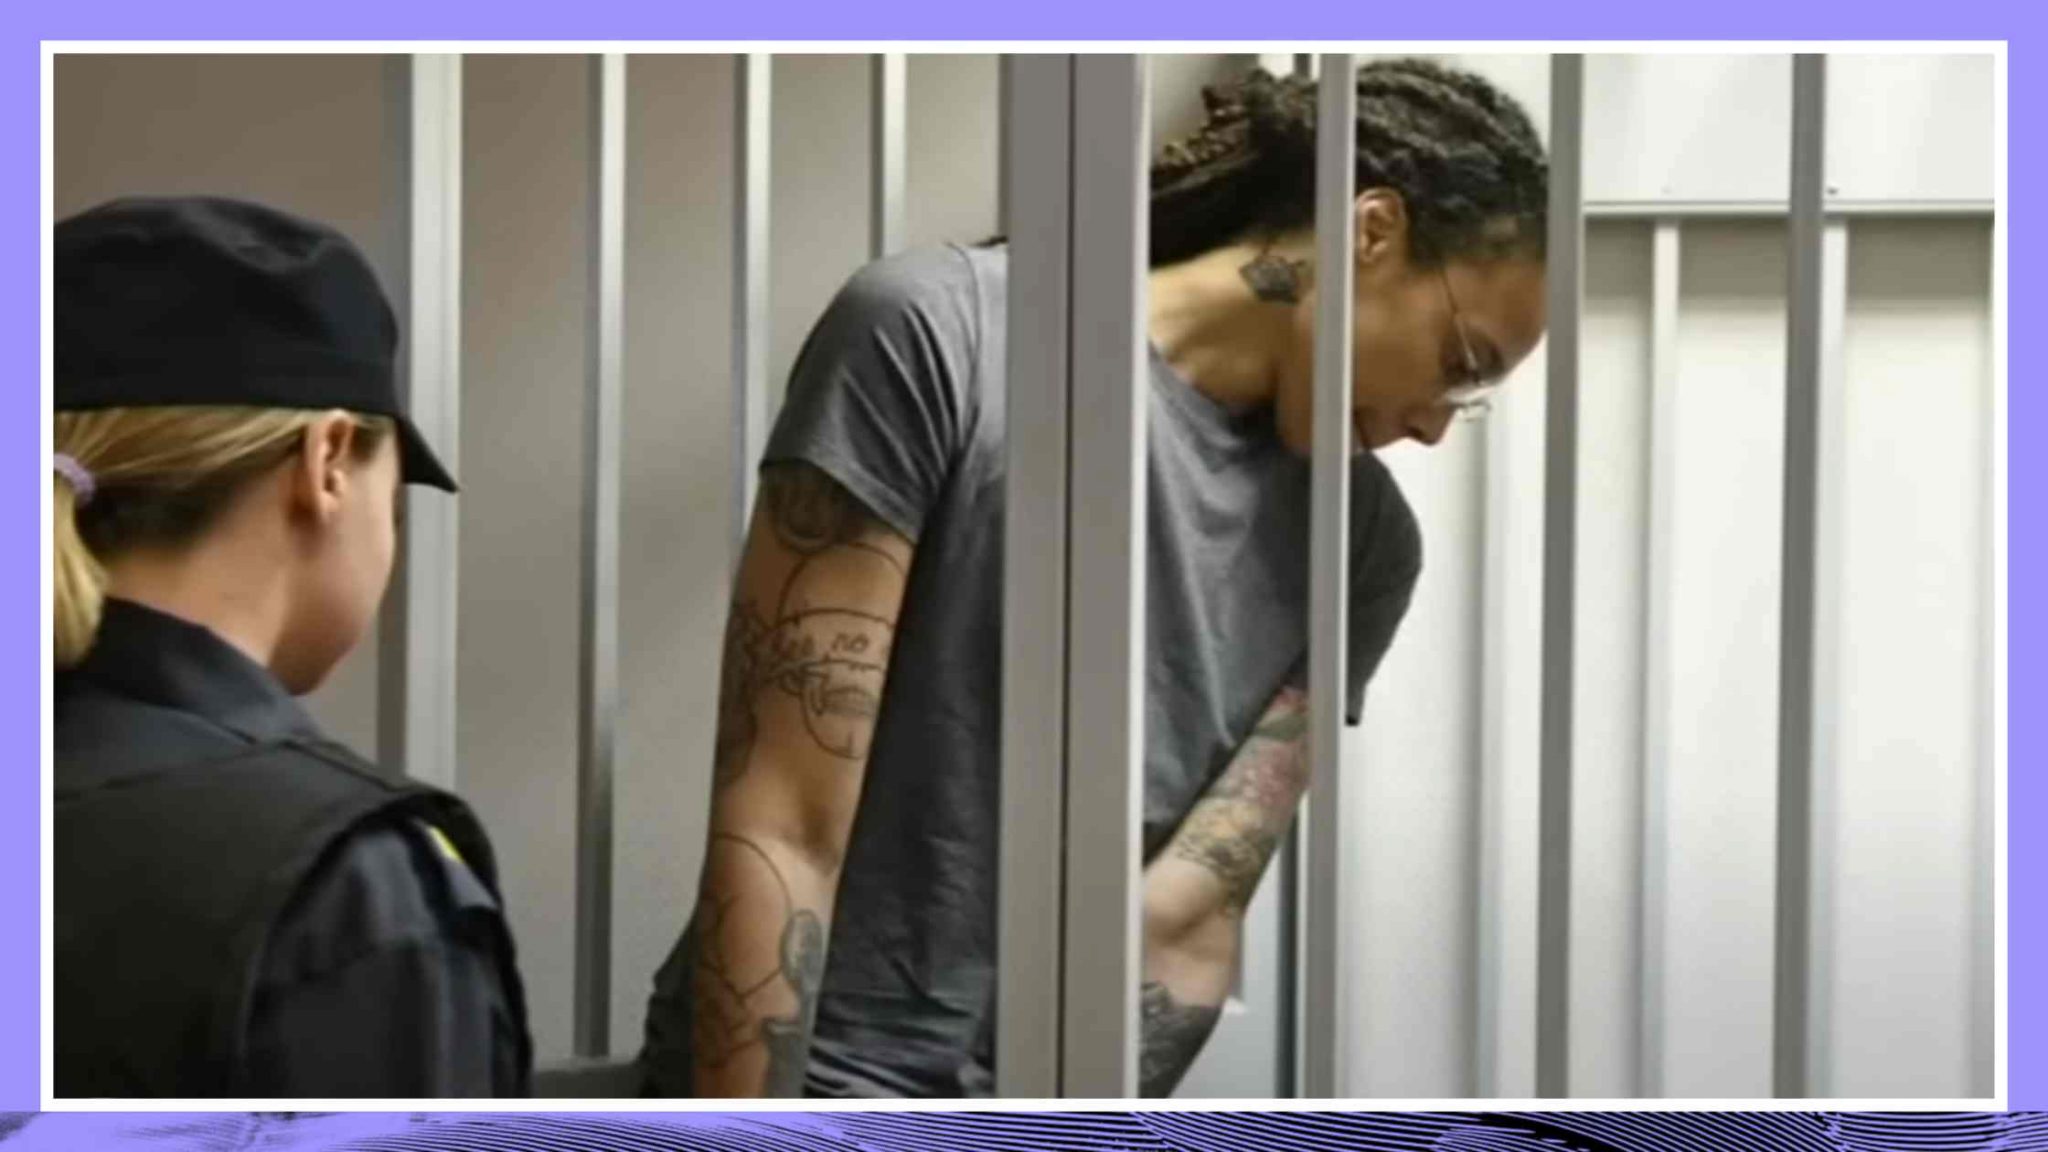 New Images Show Brittney Griner’s Life Inside Russian Penal Colony Transcript